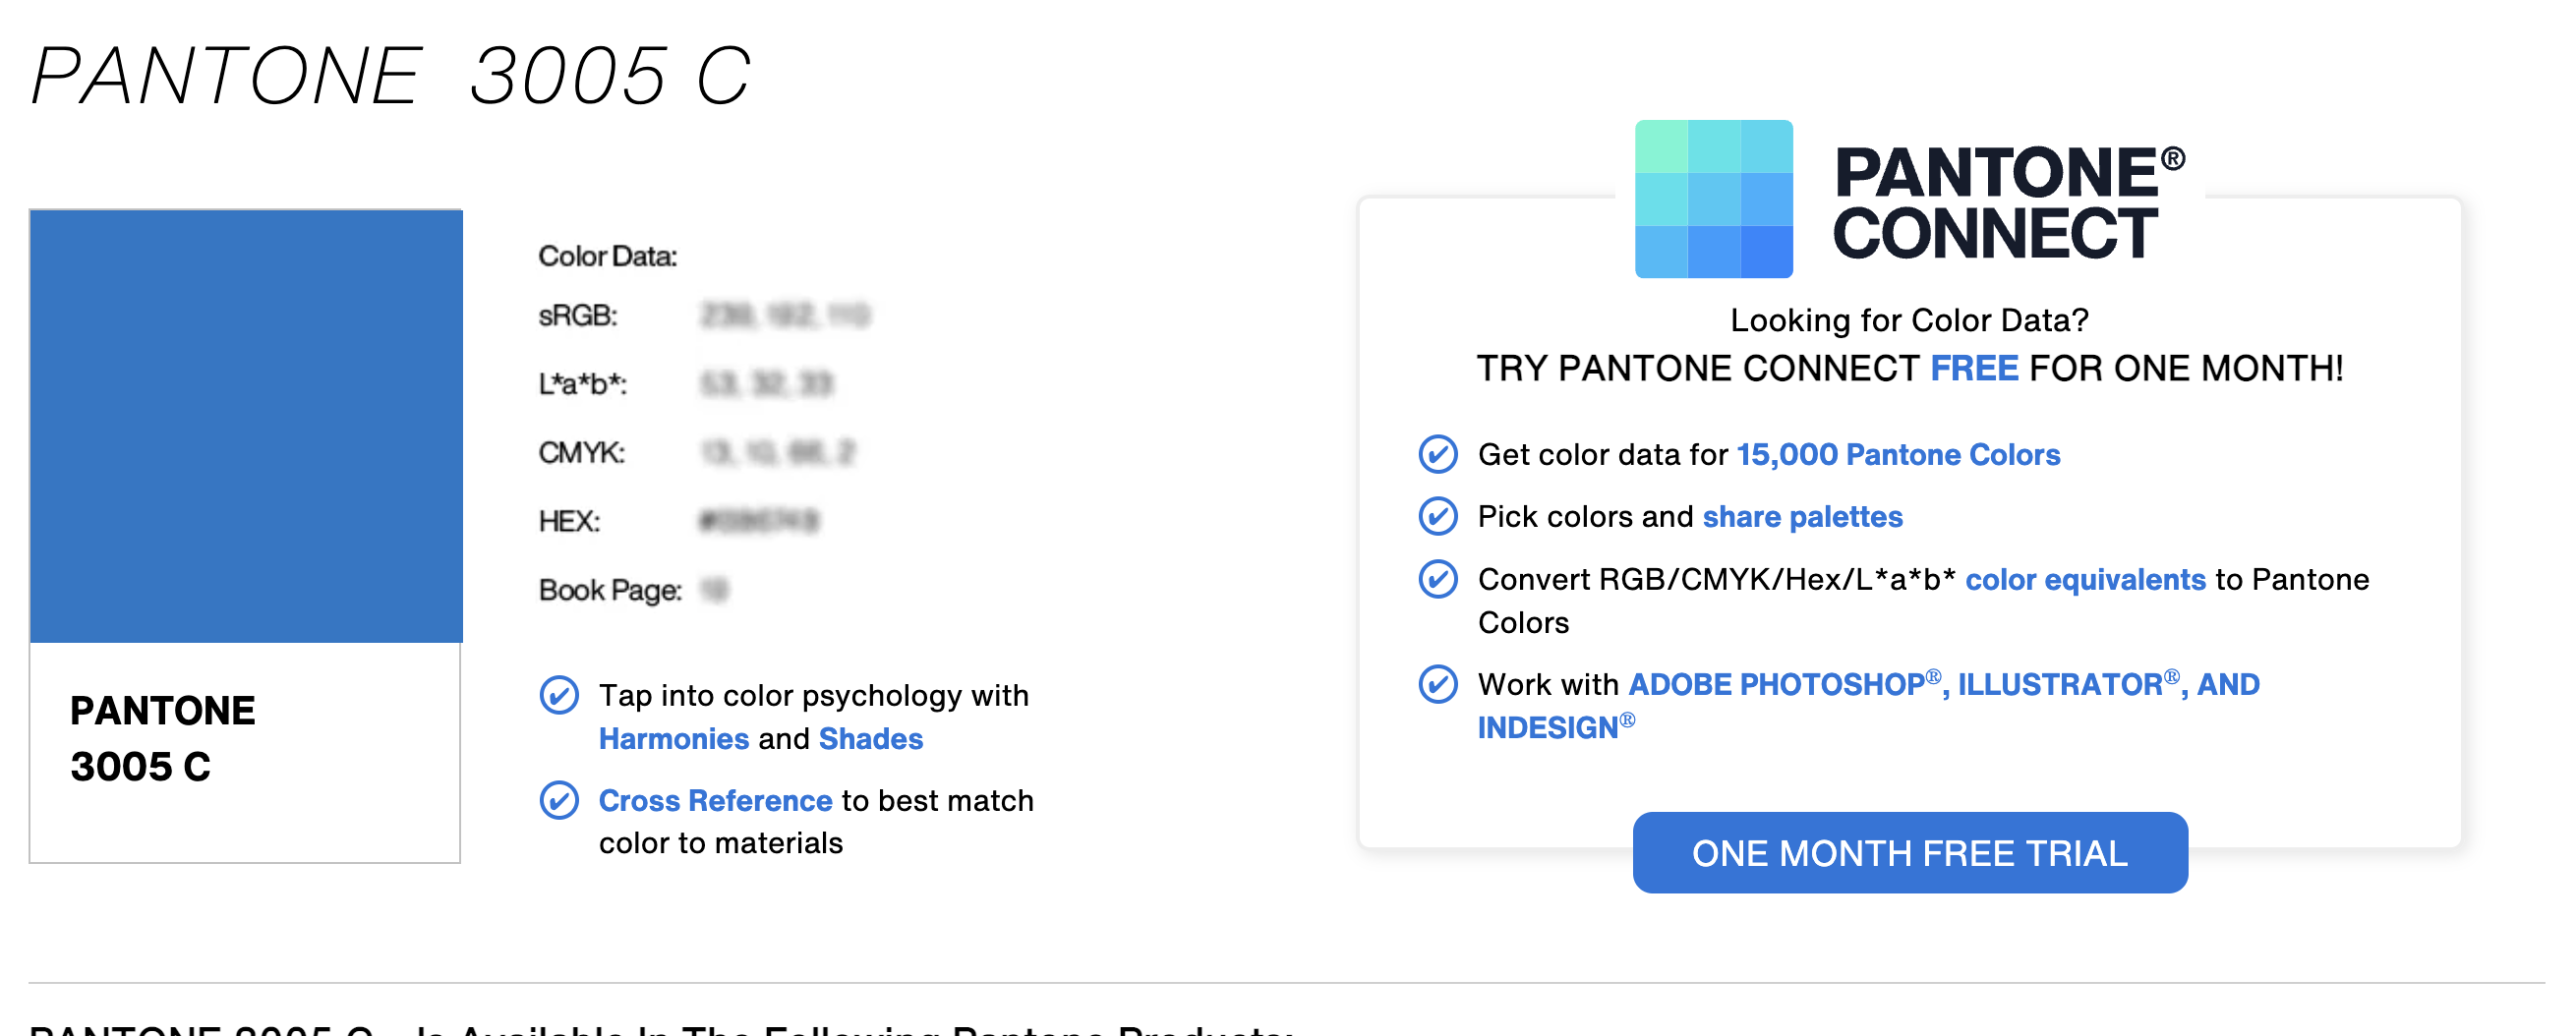 Pantone colors have disappeared in Adobe